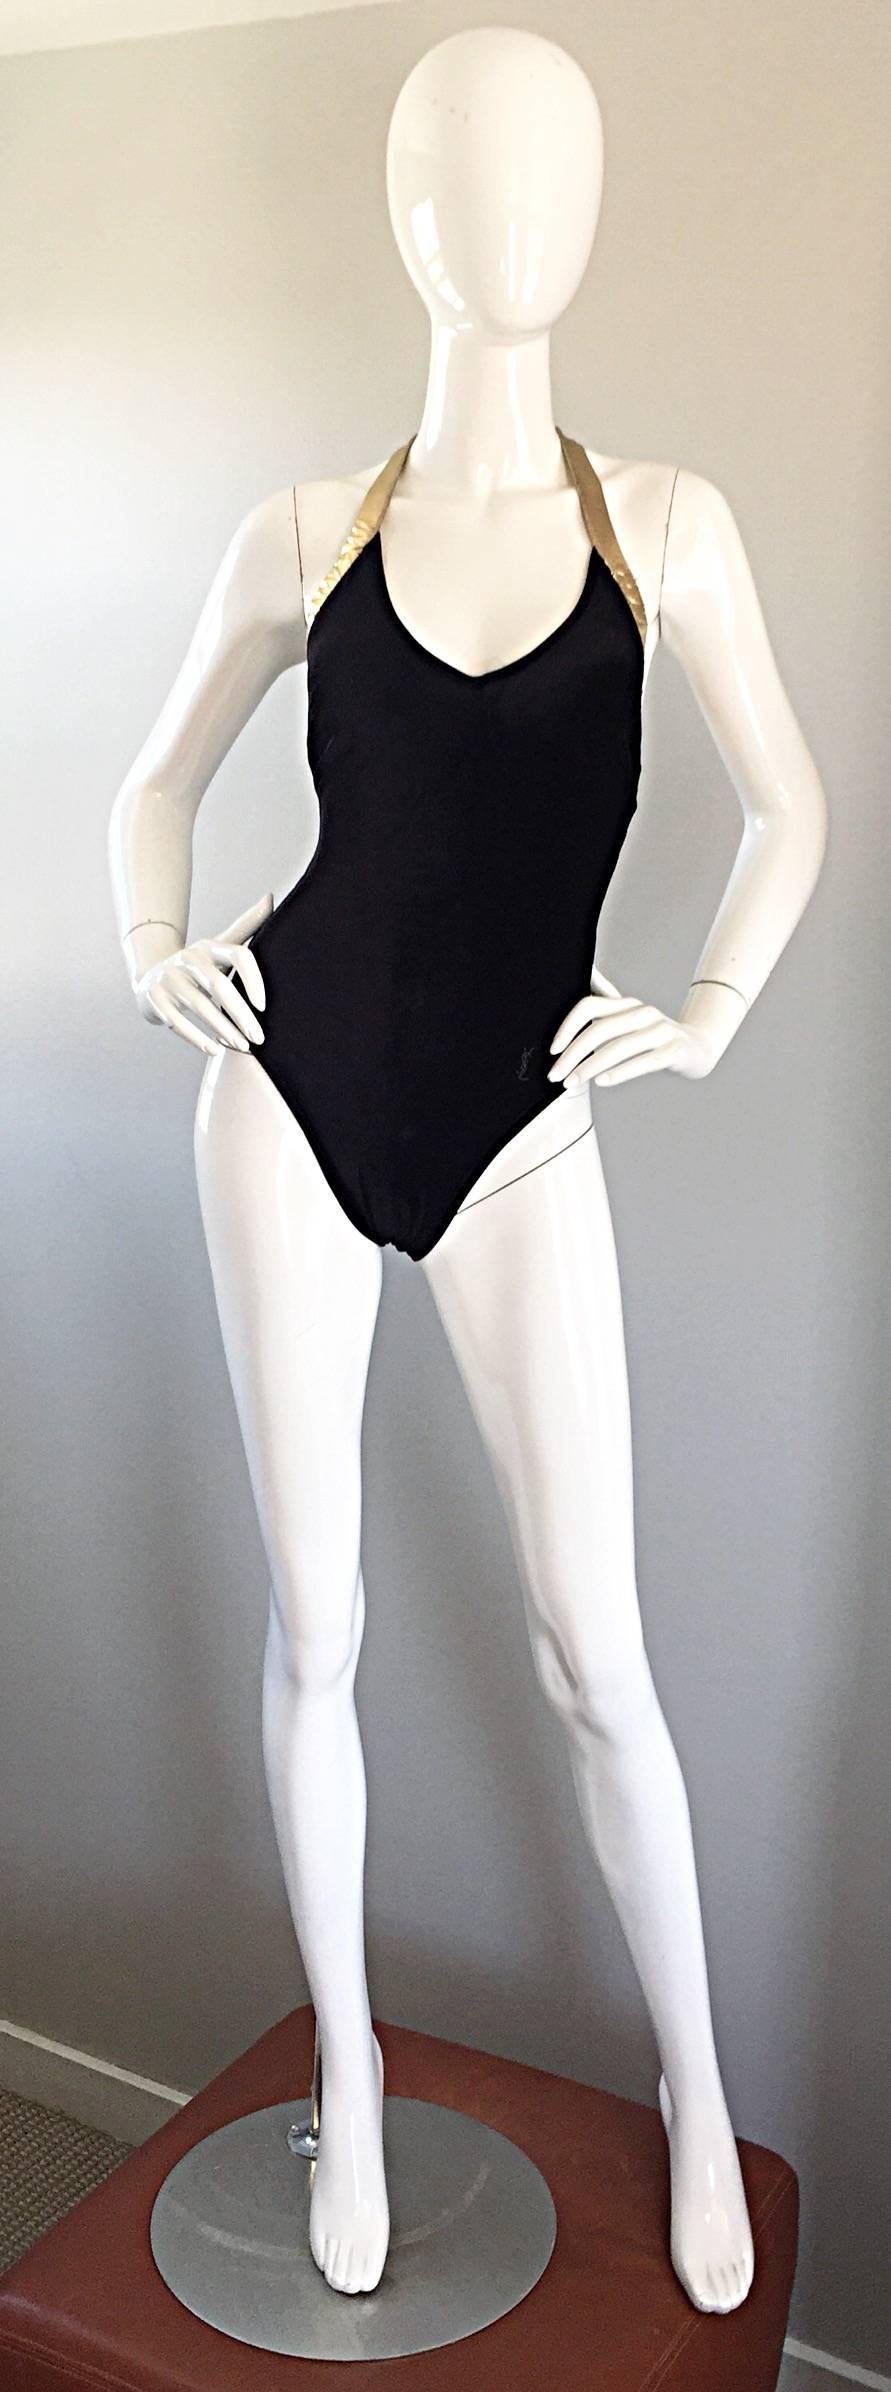 Sexy vintage 1970s 70s YVES SAINT LAURENT black and gold velvet swimsuit or bodysuit! Softest cotton velvet is waterproof, and super flattering and comfortable on the body. Gold metallic racerback. YSL logo at left bottom side. Great for the beach,